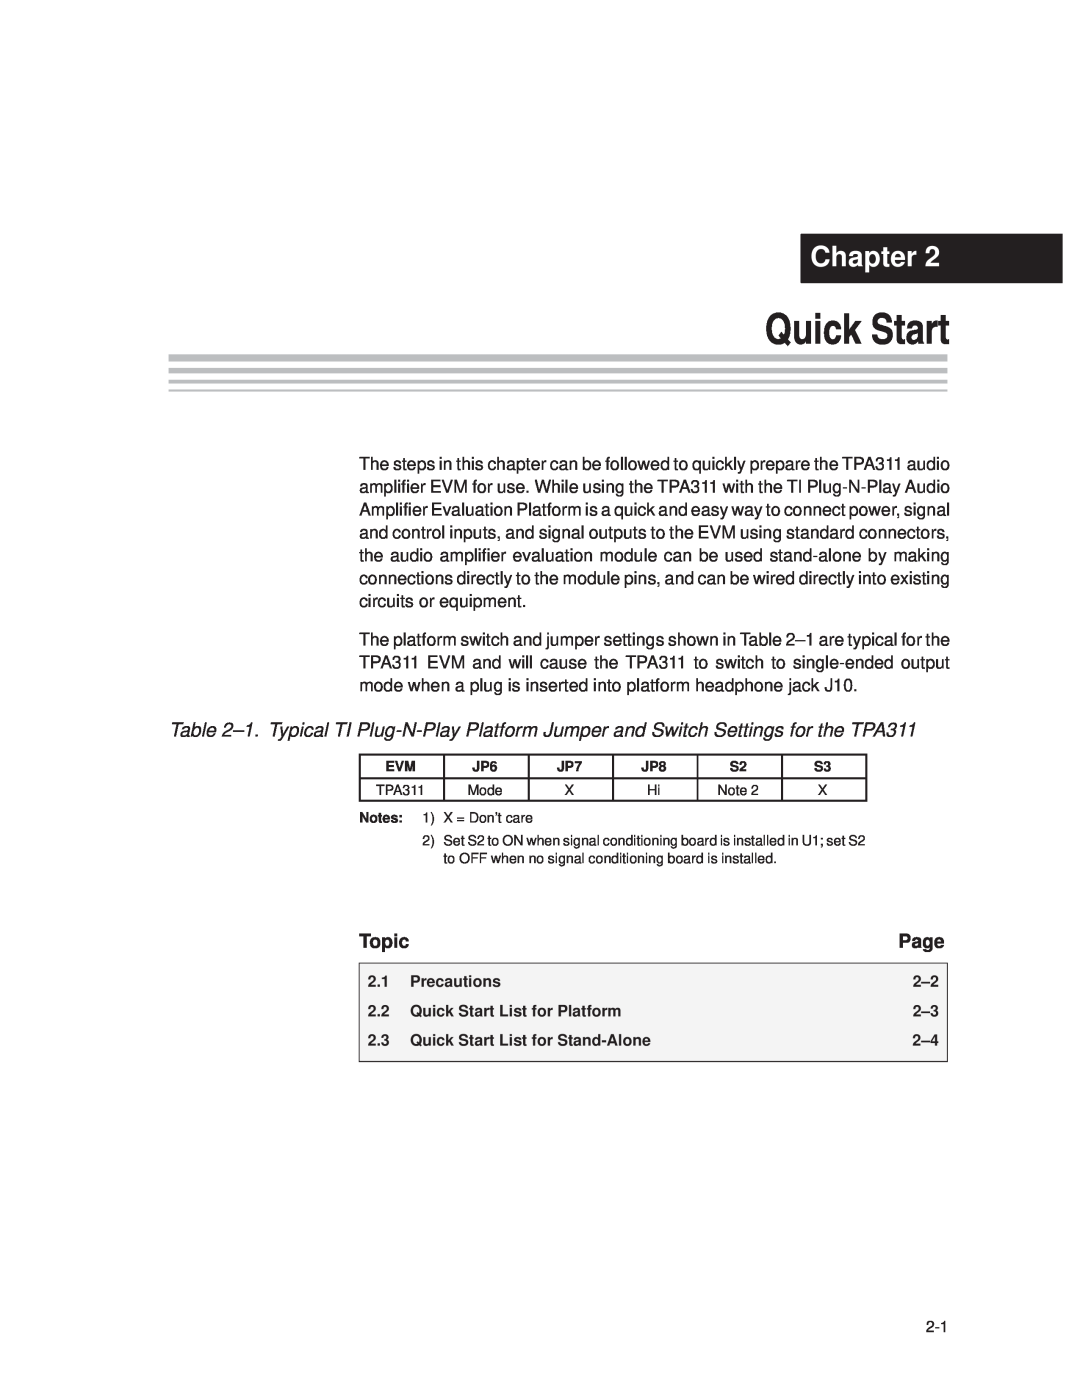 Texas Instruments TPA 311 manual Chapter, Page, Topic, Precautions, Quick Start List for Platform 